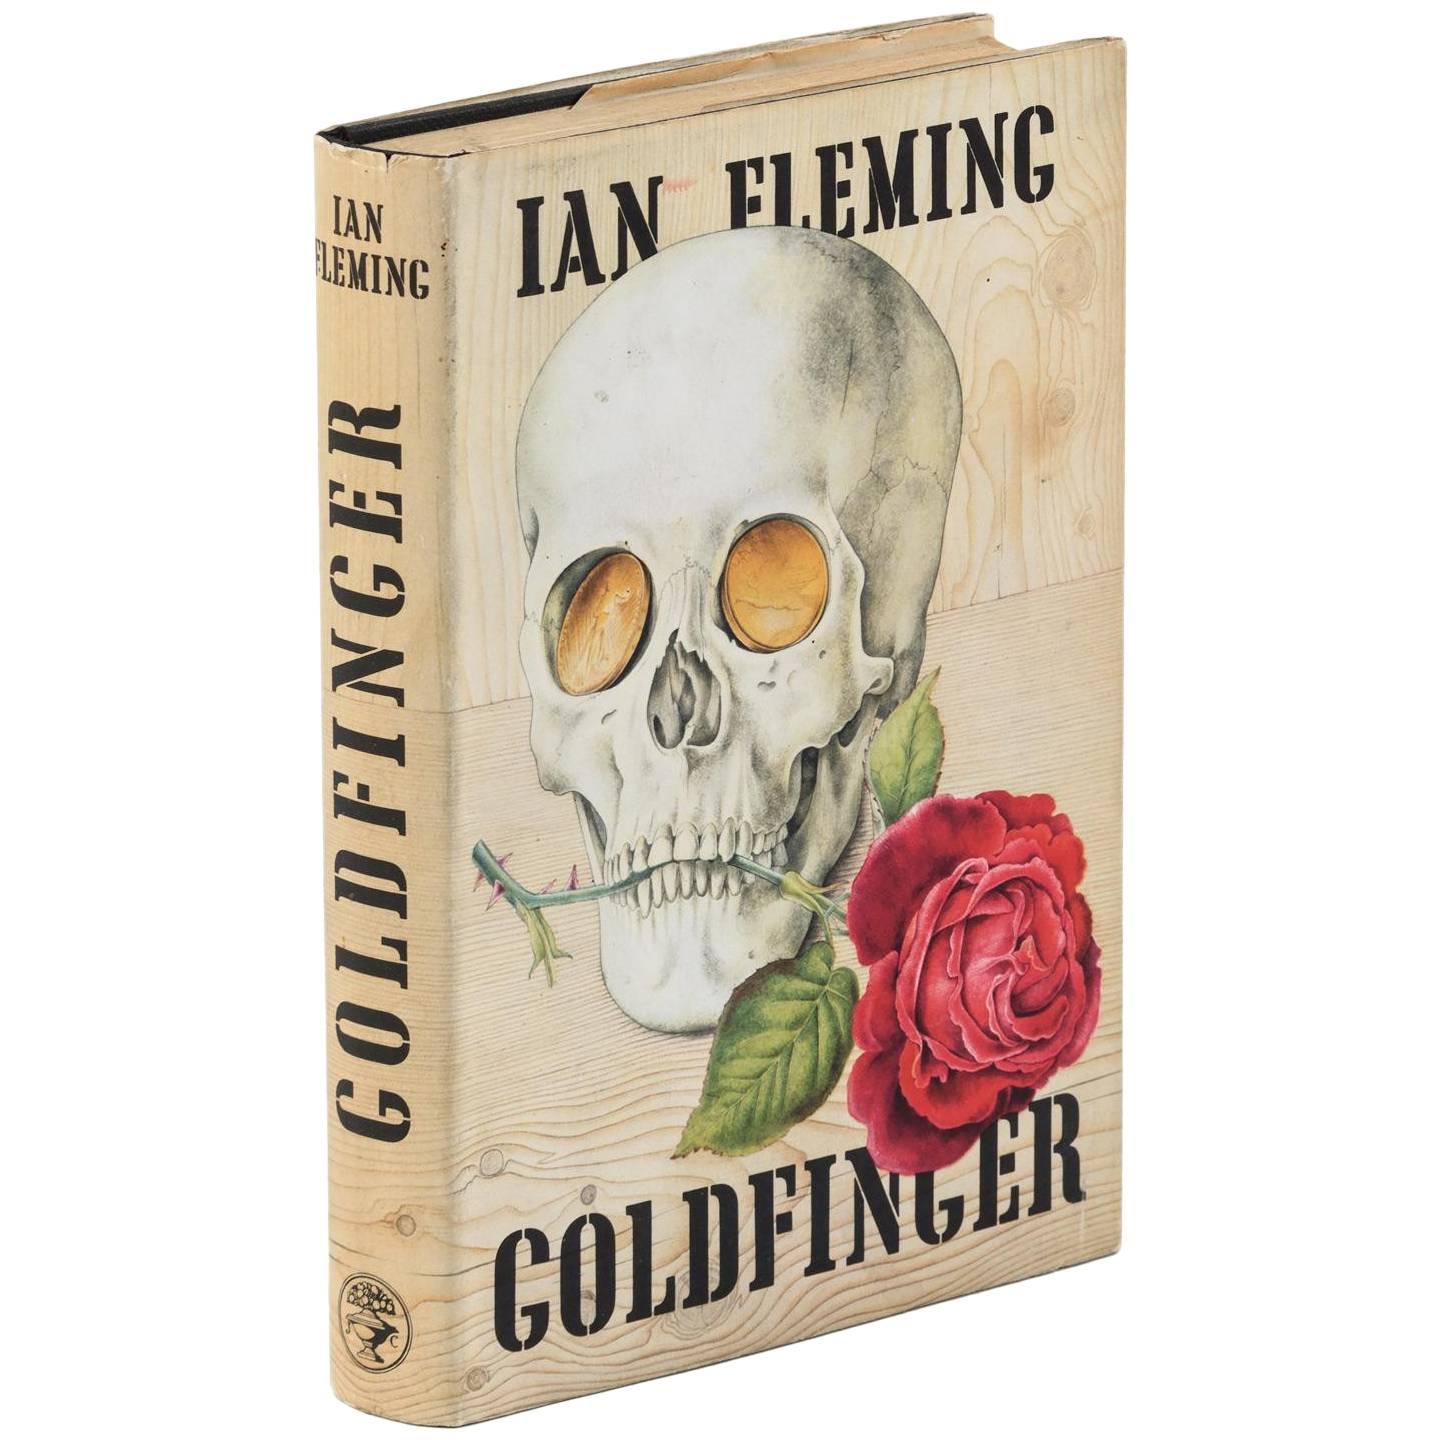 Goldfinger Book by Ian Fleming, First Edition of James Bond Classic, circa 1959